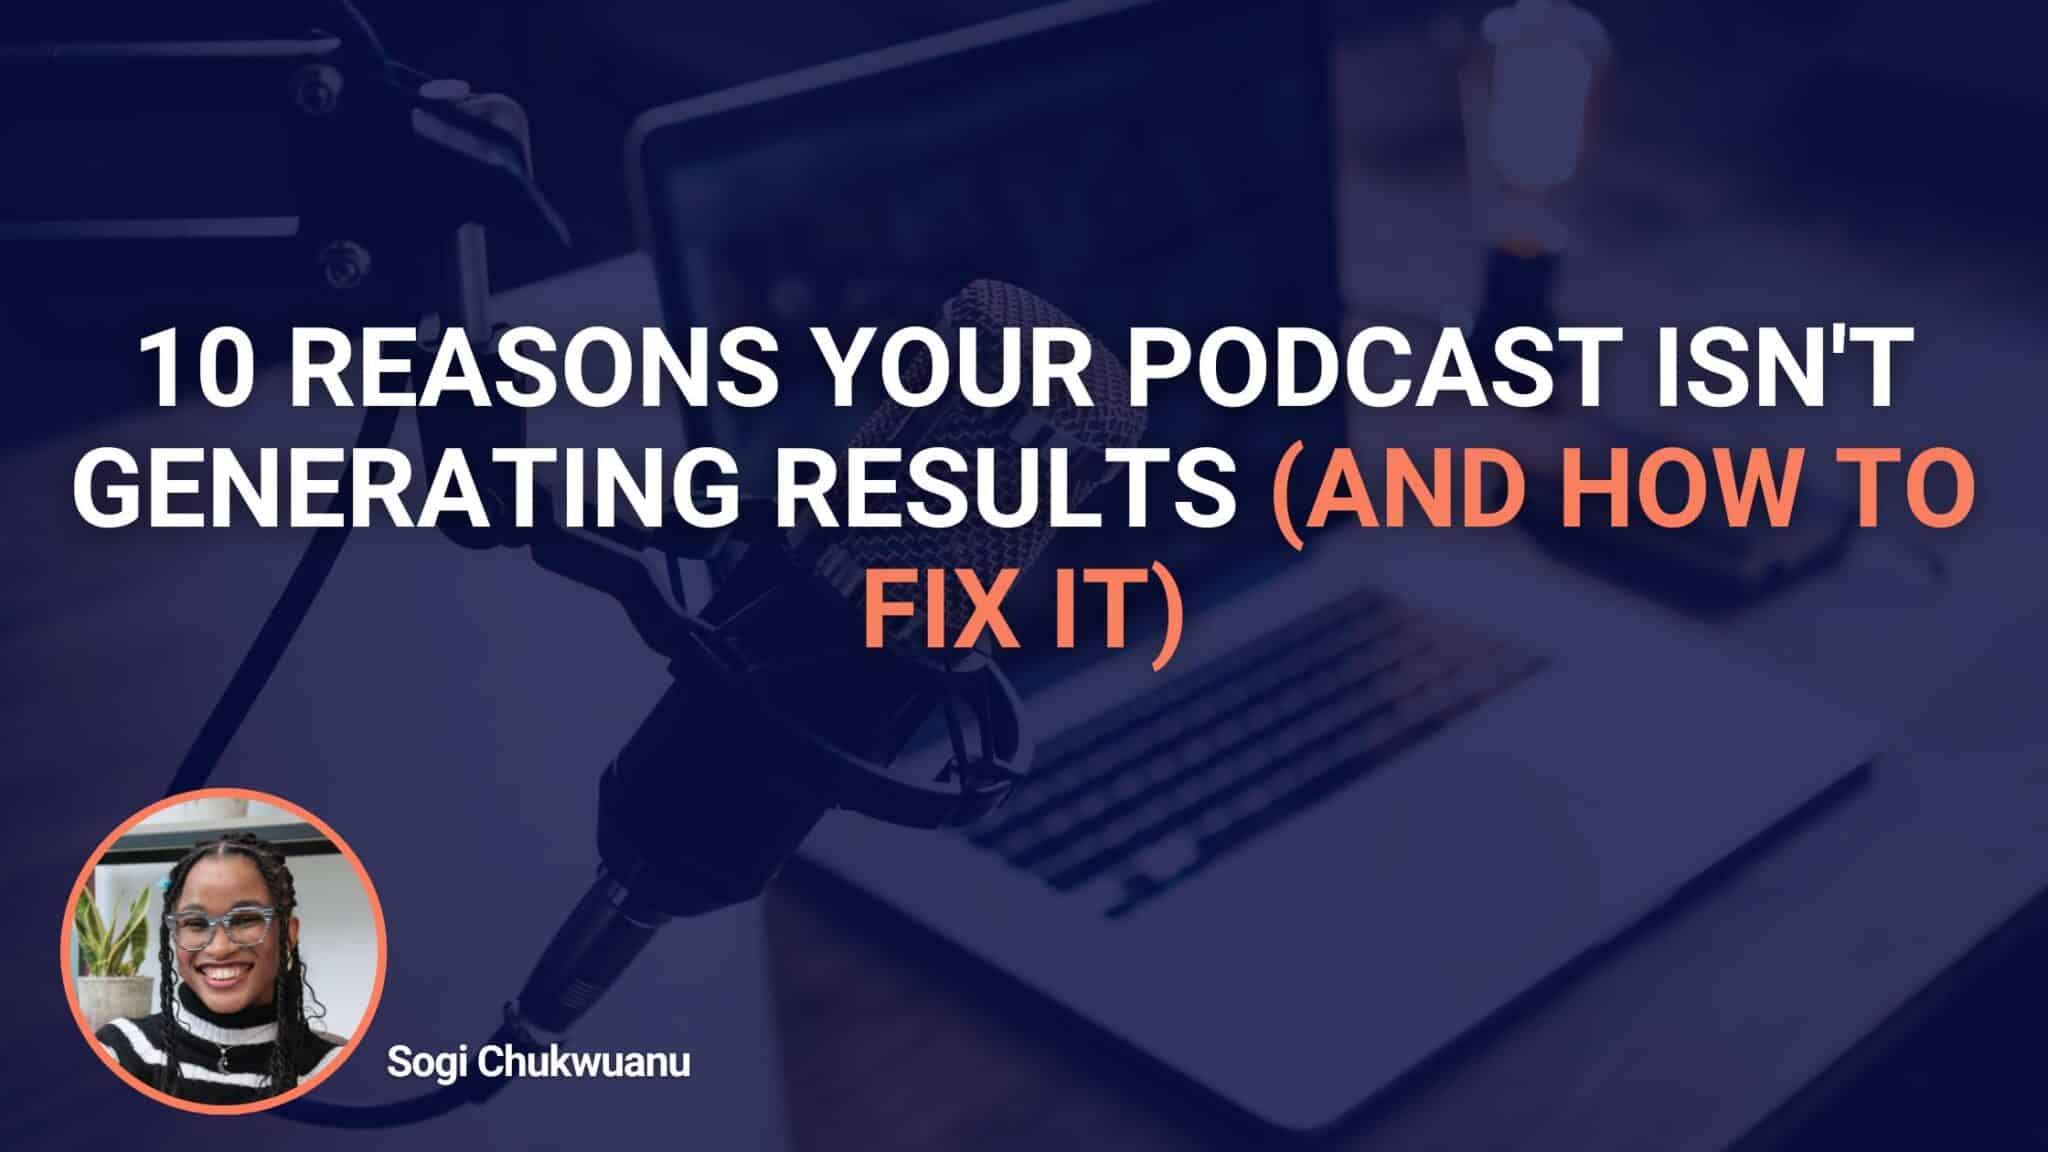 10 Reasons Your Podcast Isn’t Generating Results (And How To Fix It)